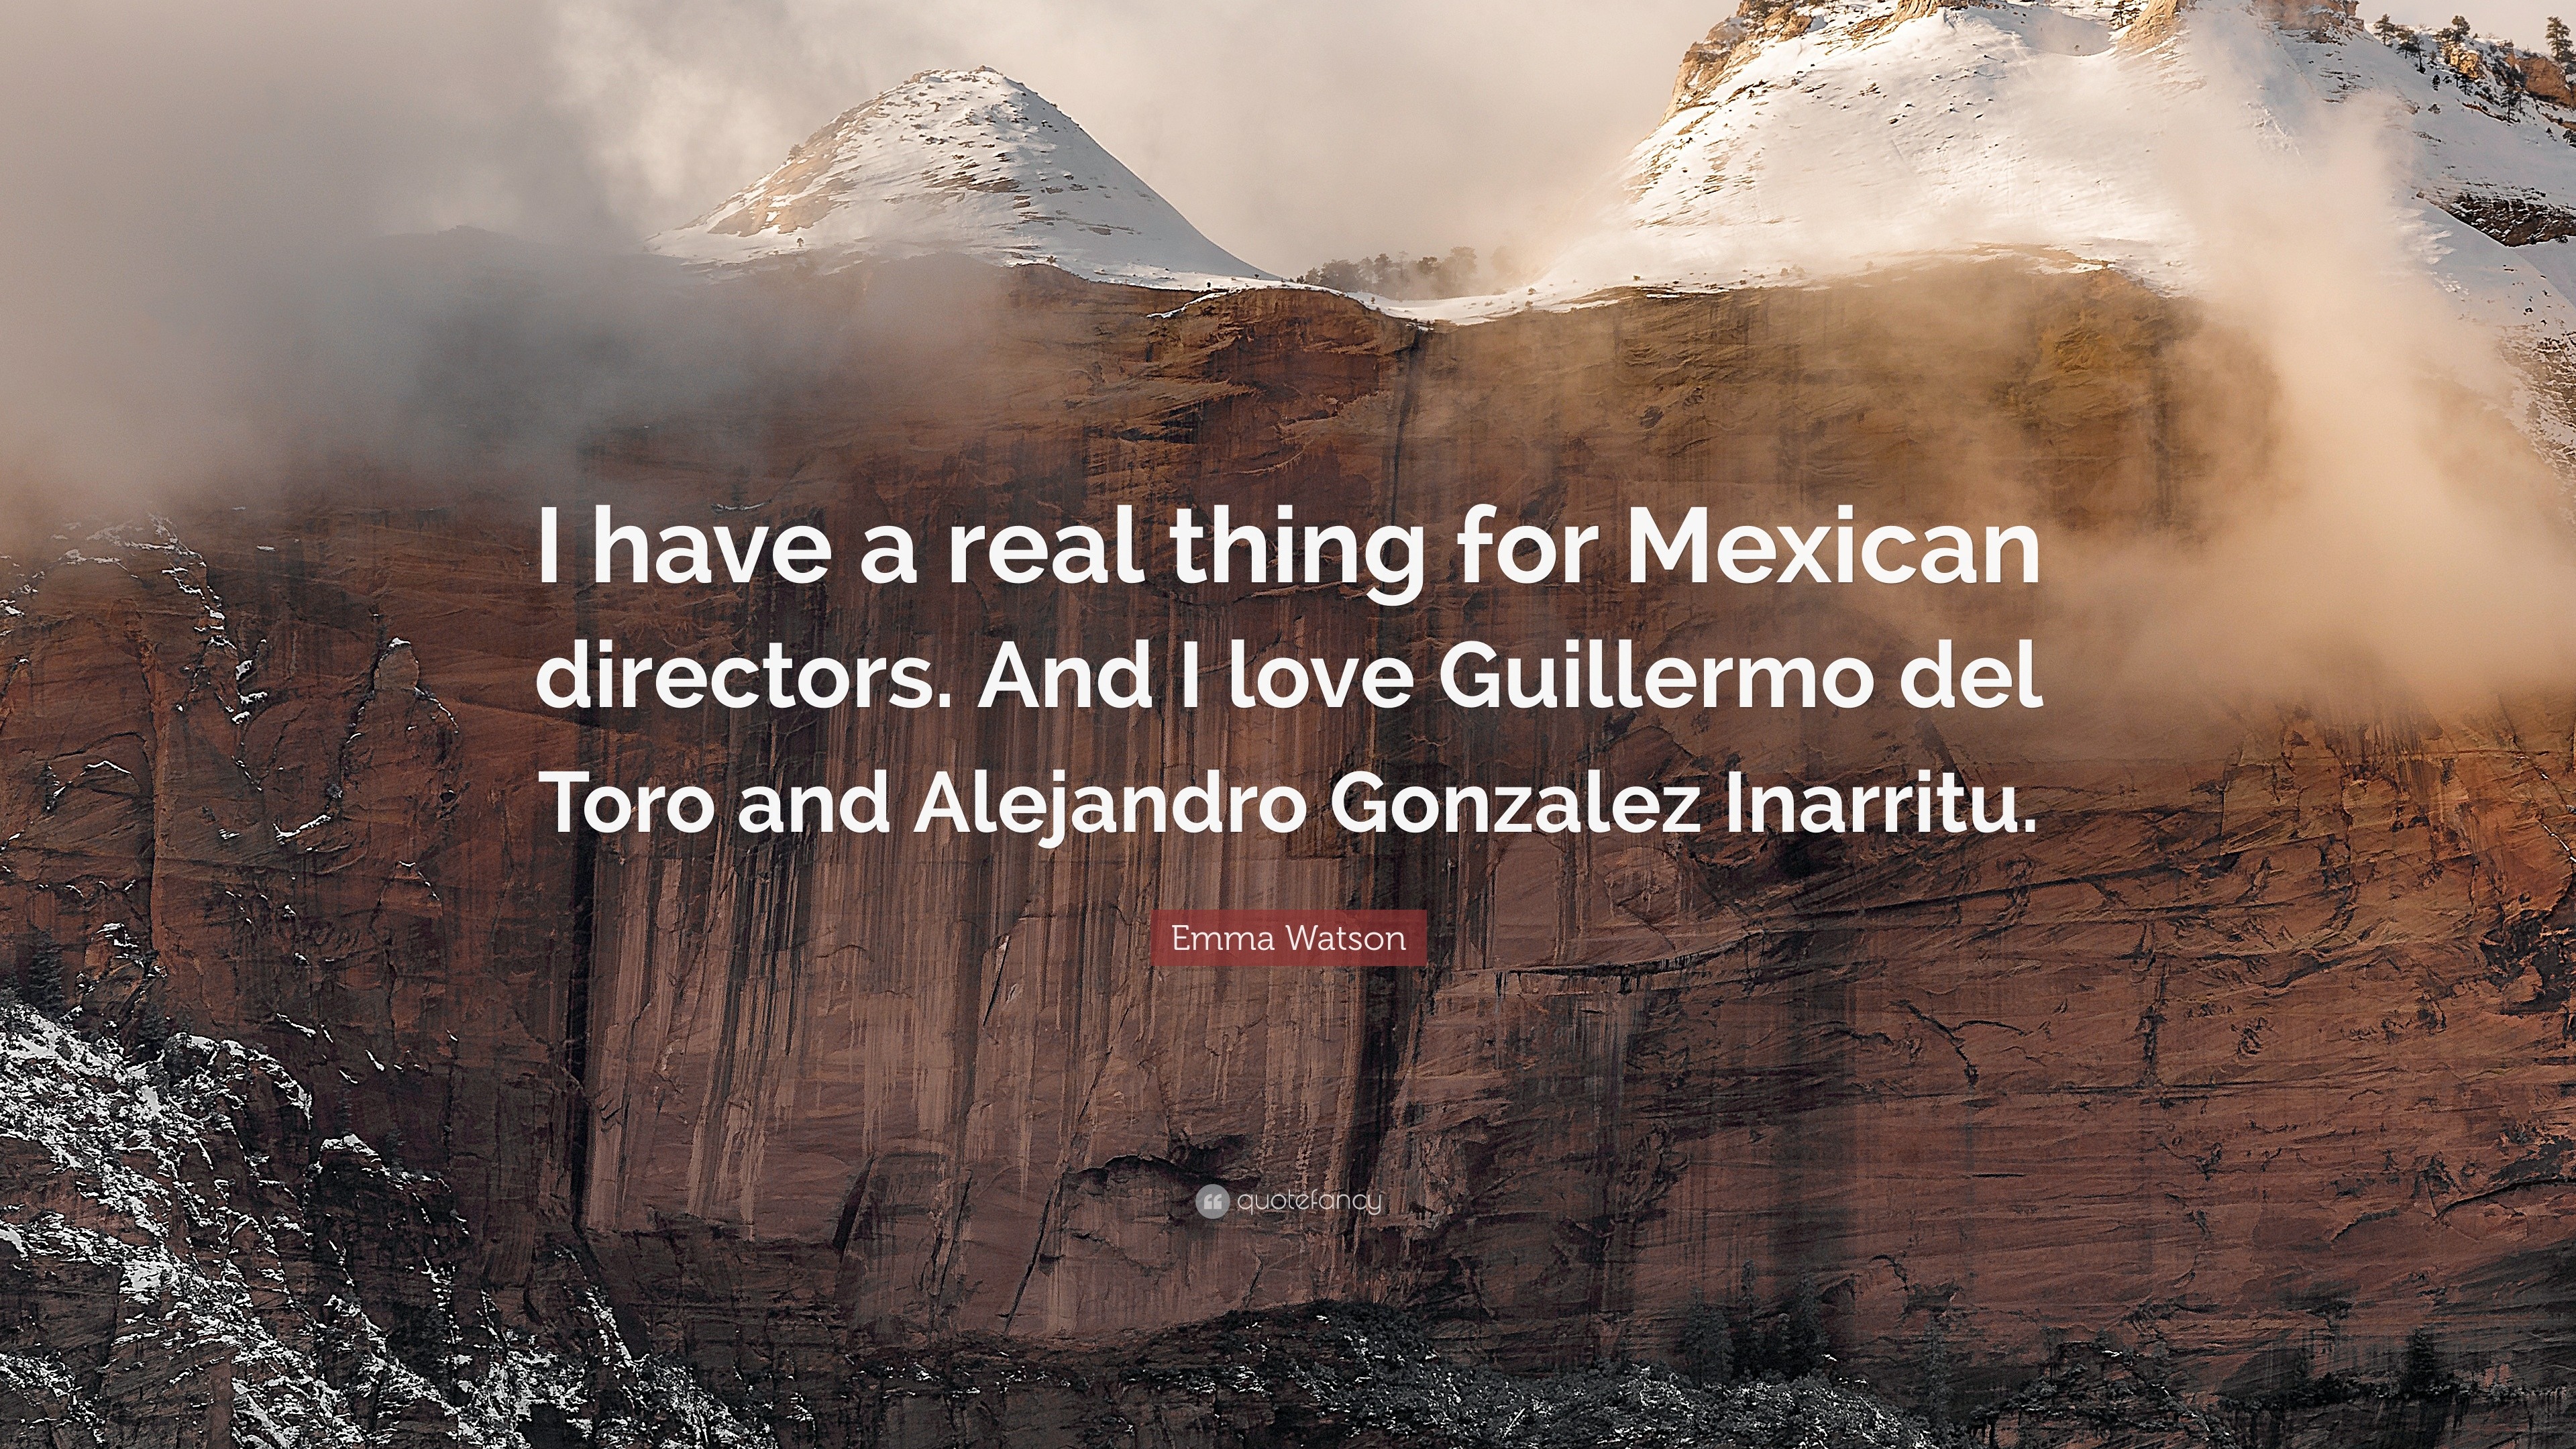 Emma Watson Quote I Have A Real Thing For Mexican Directors And Images, Photos, Reviews